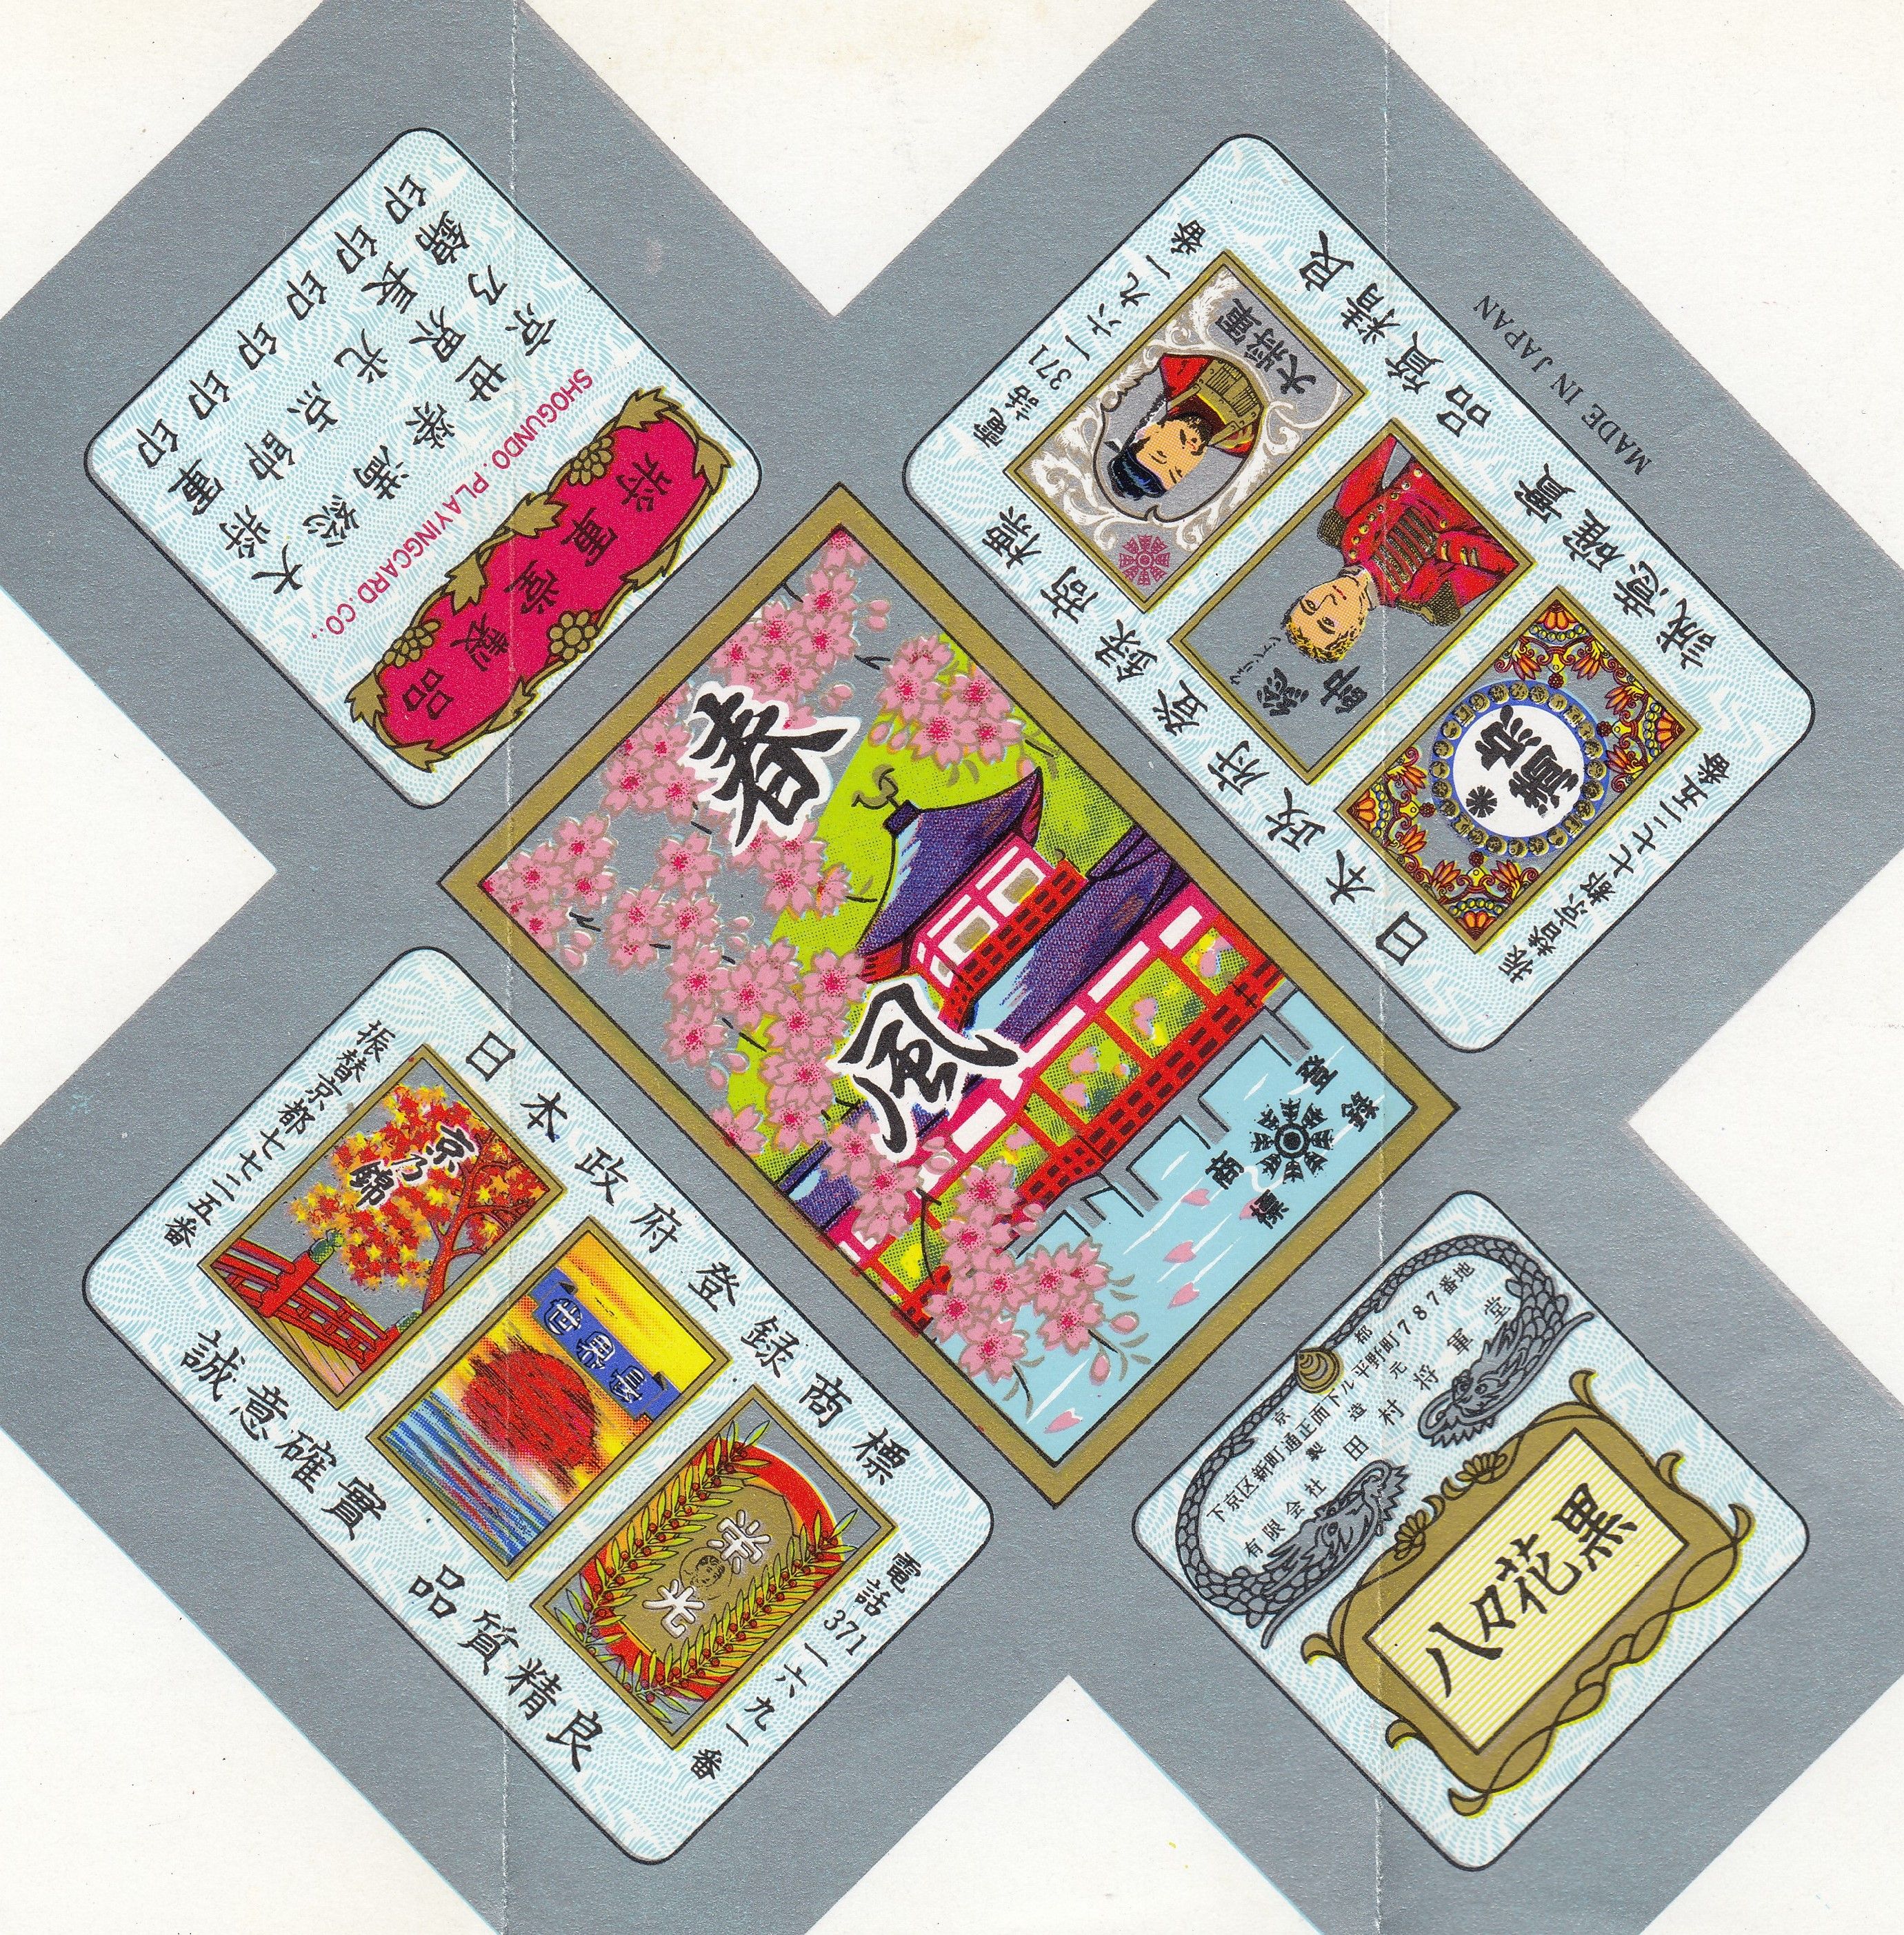 A hanafuda wrapper folded flat, showing the top face of the box and the four sides around it.